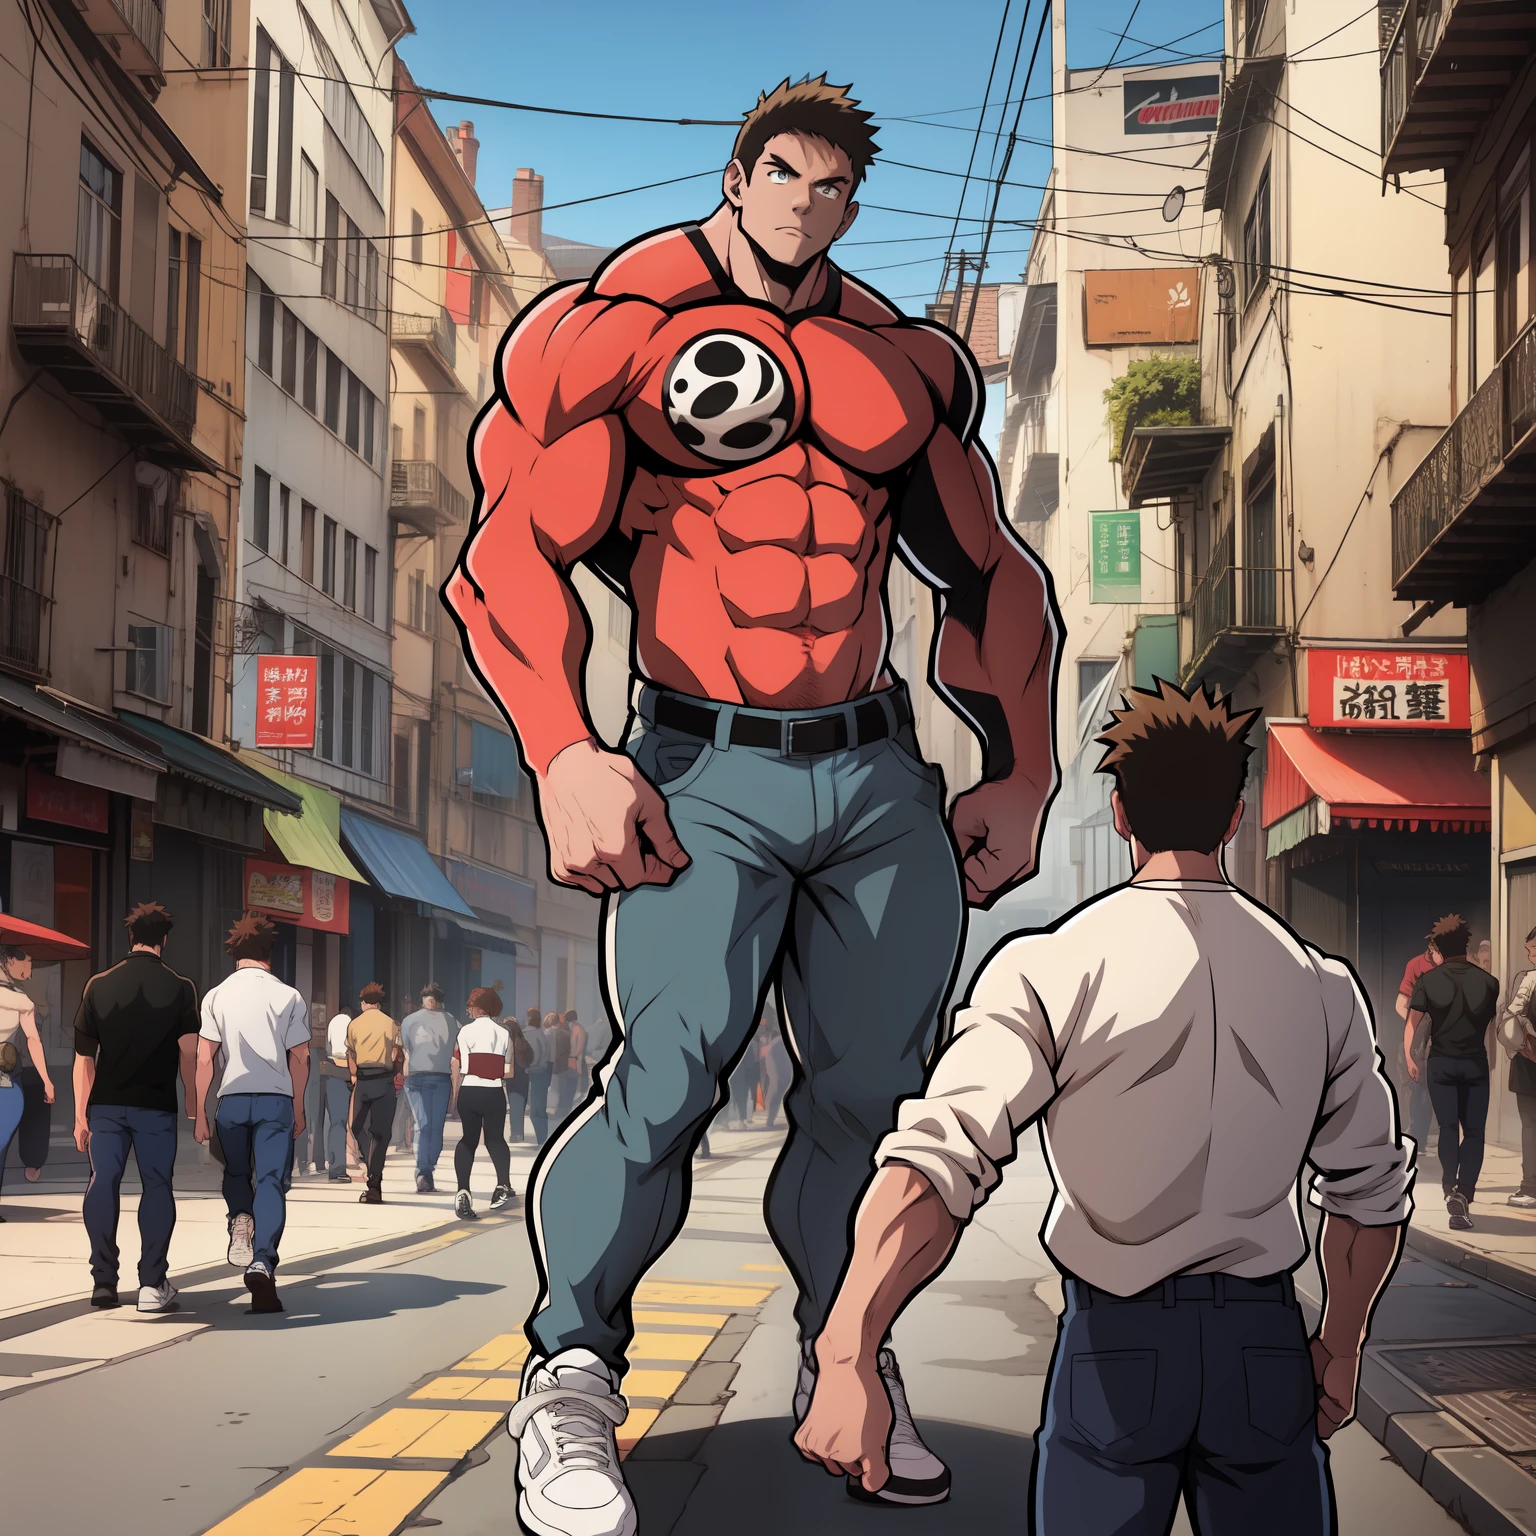 (((Arte estilo de anime))), ((artistic work)) muscular male character, corpo de bodybuilder, wearing a red blouse with black sleeves, wearing a pair of grey pants, wearing white sneakers, Poster to promote the character, Artwork in an urban setting, busy city with cars, people, city center, heroic character, posters.